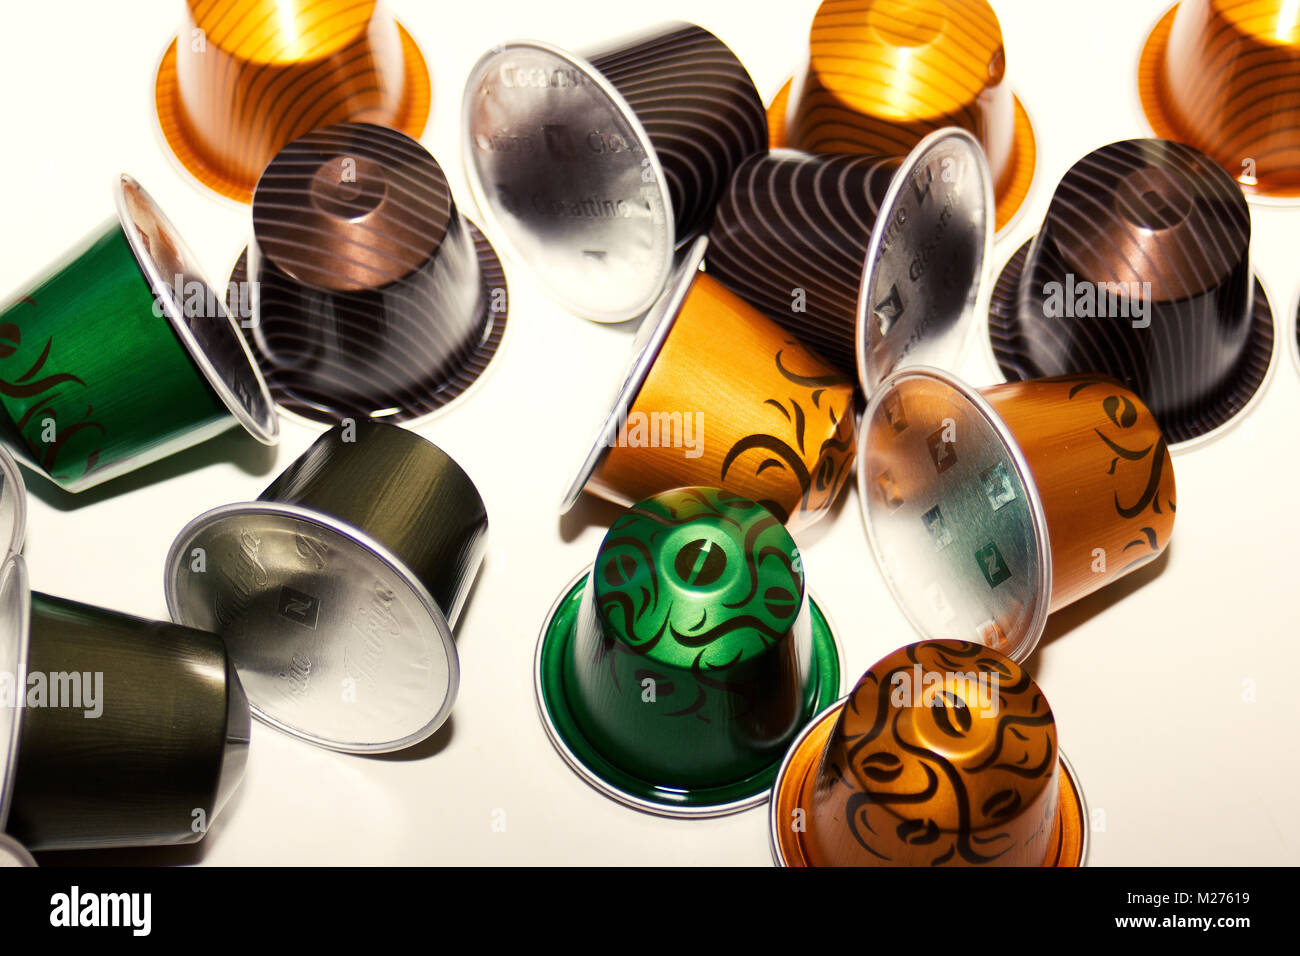 Nespresso Coffee Pods High Resolution Stock Photography and Images - Alamy